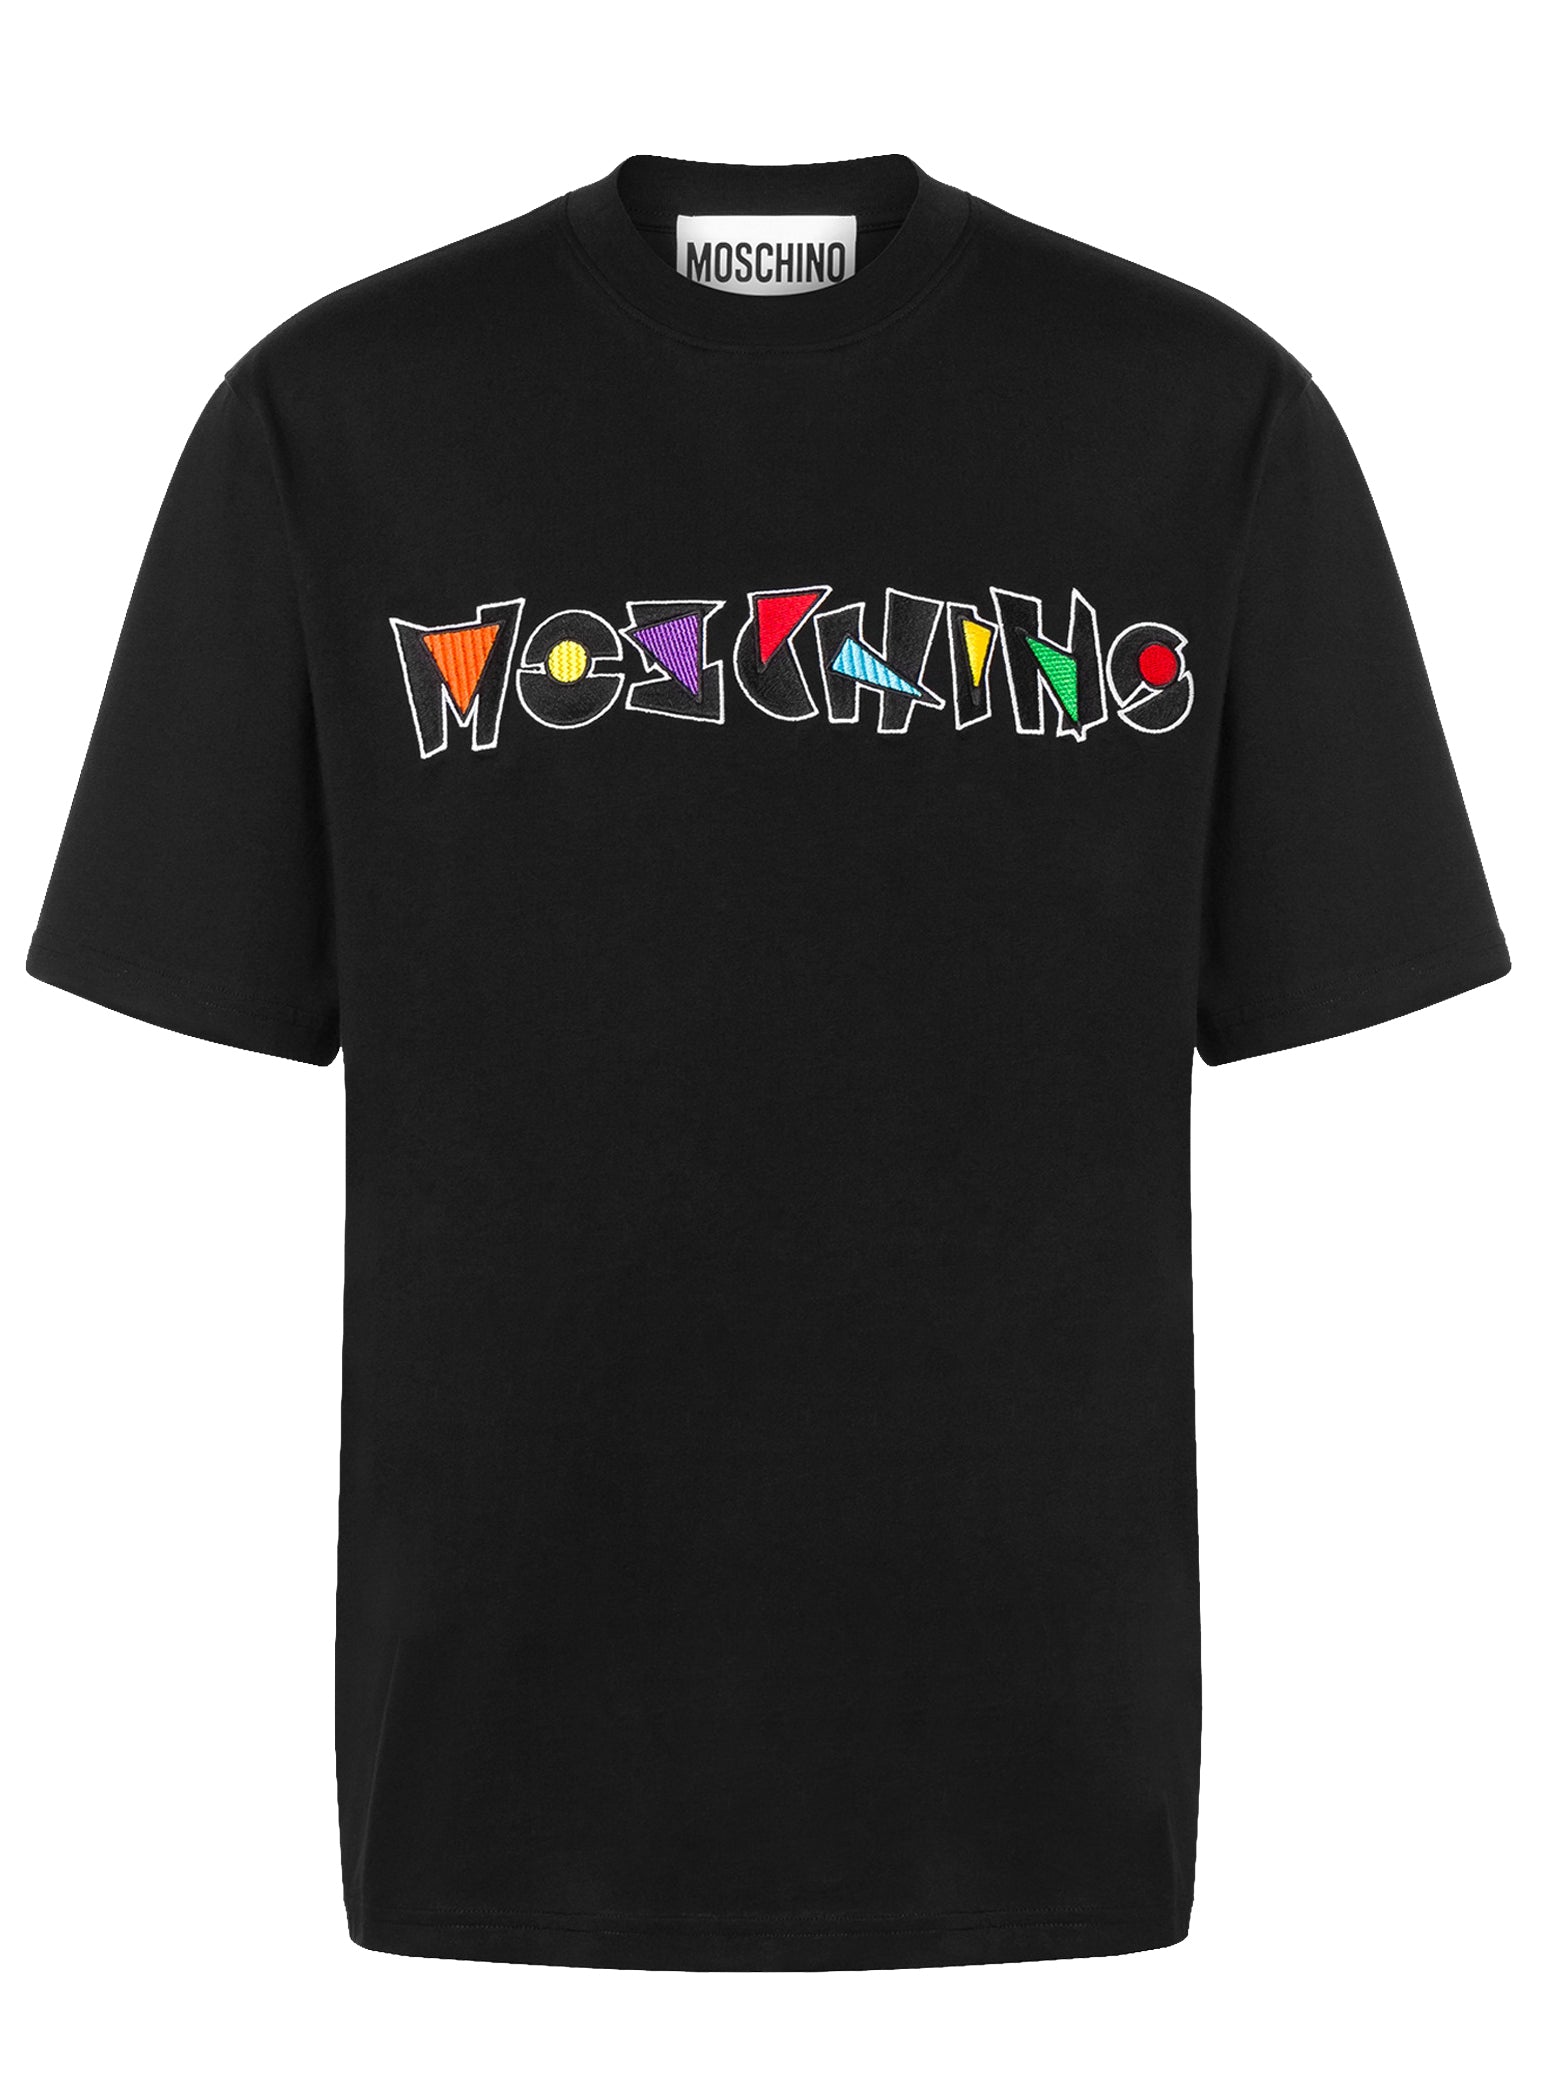 Embroidered Graphic Tee - Black